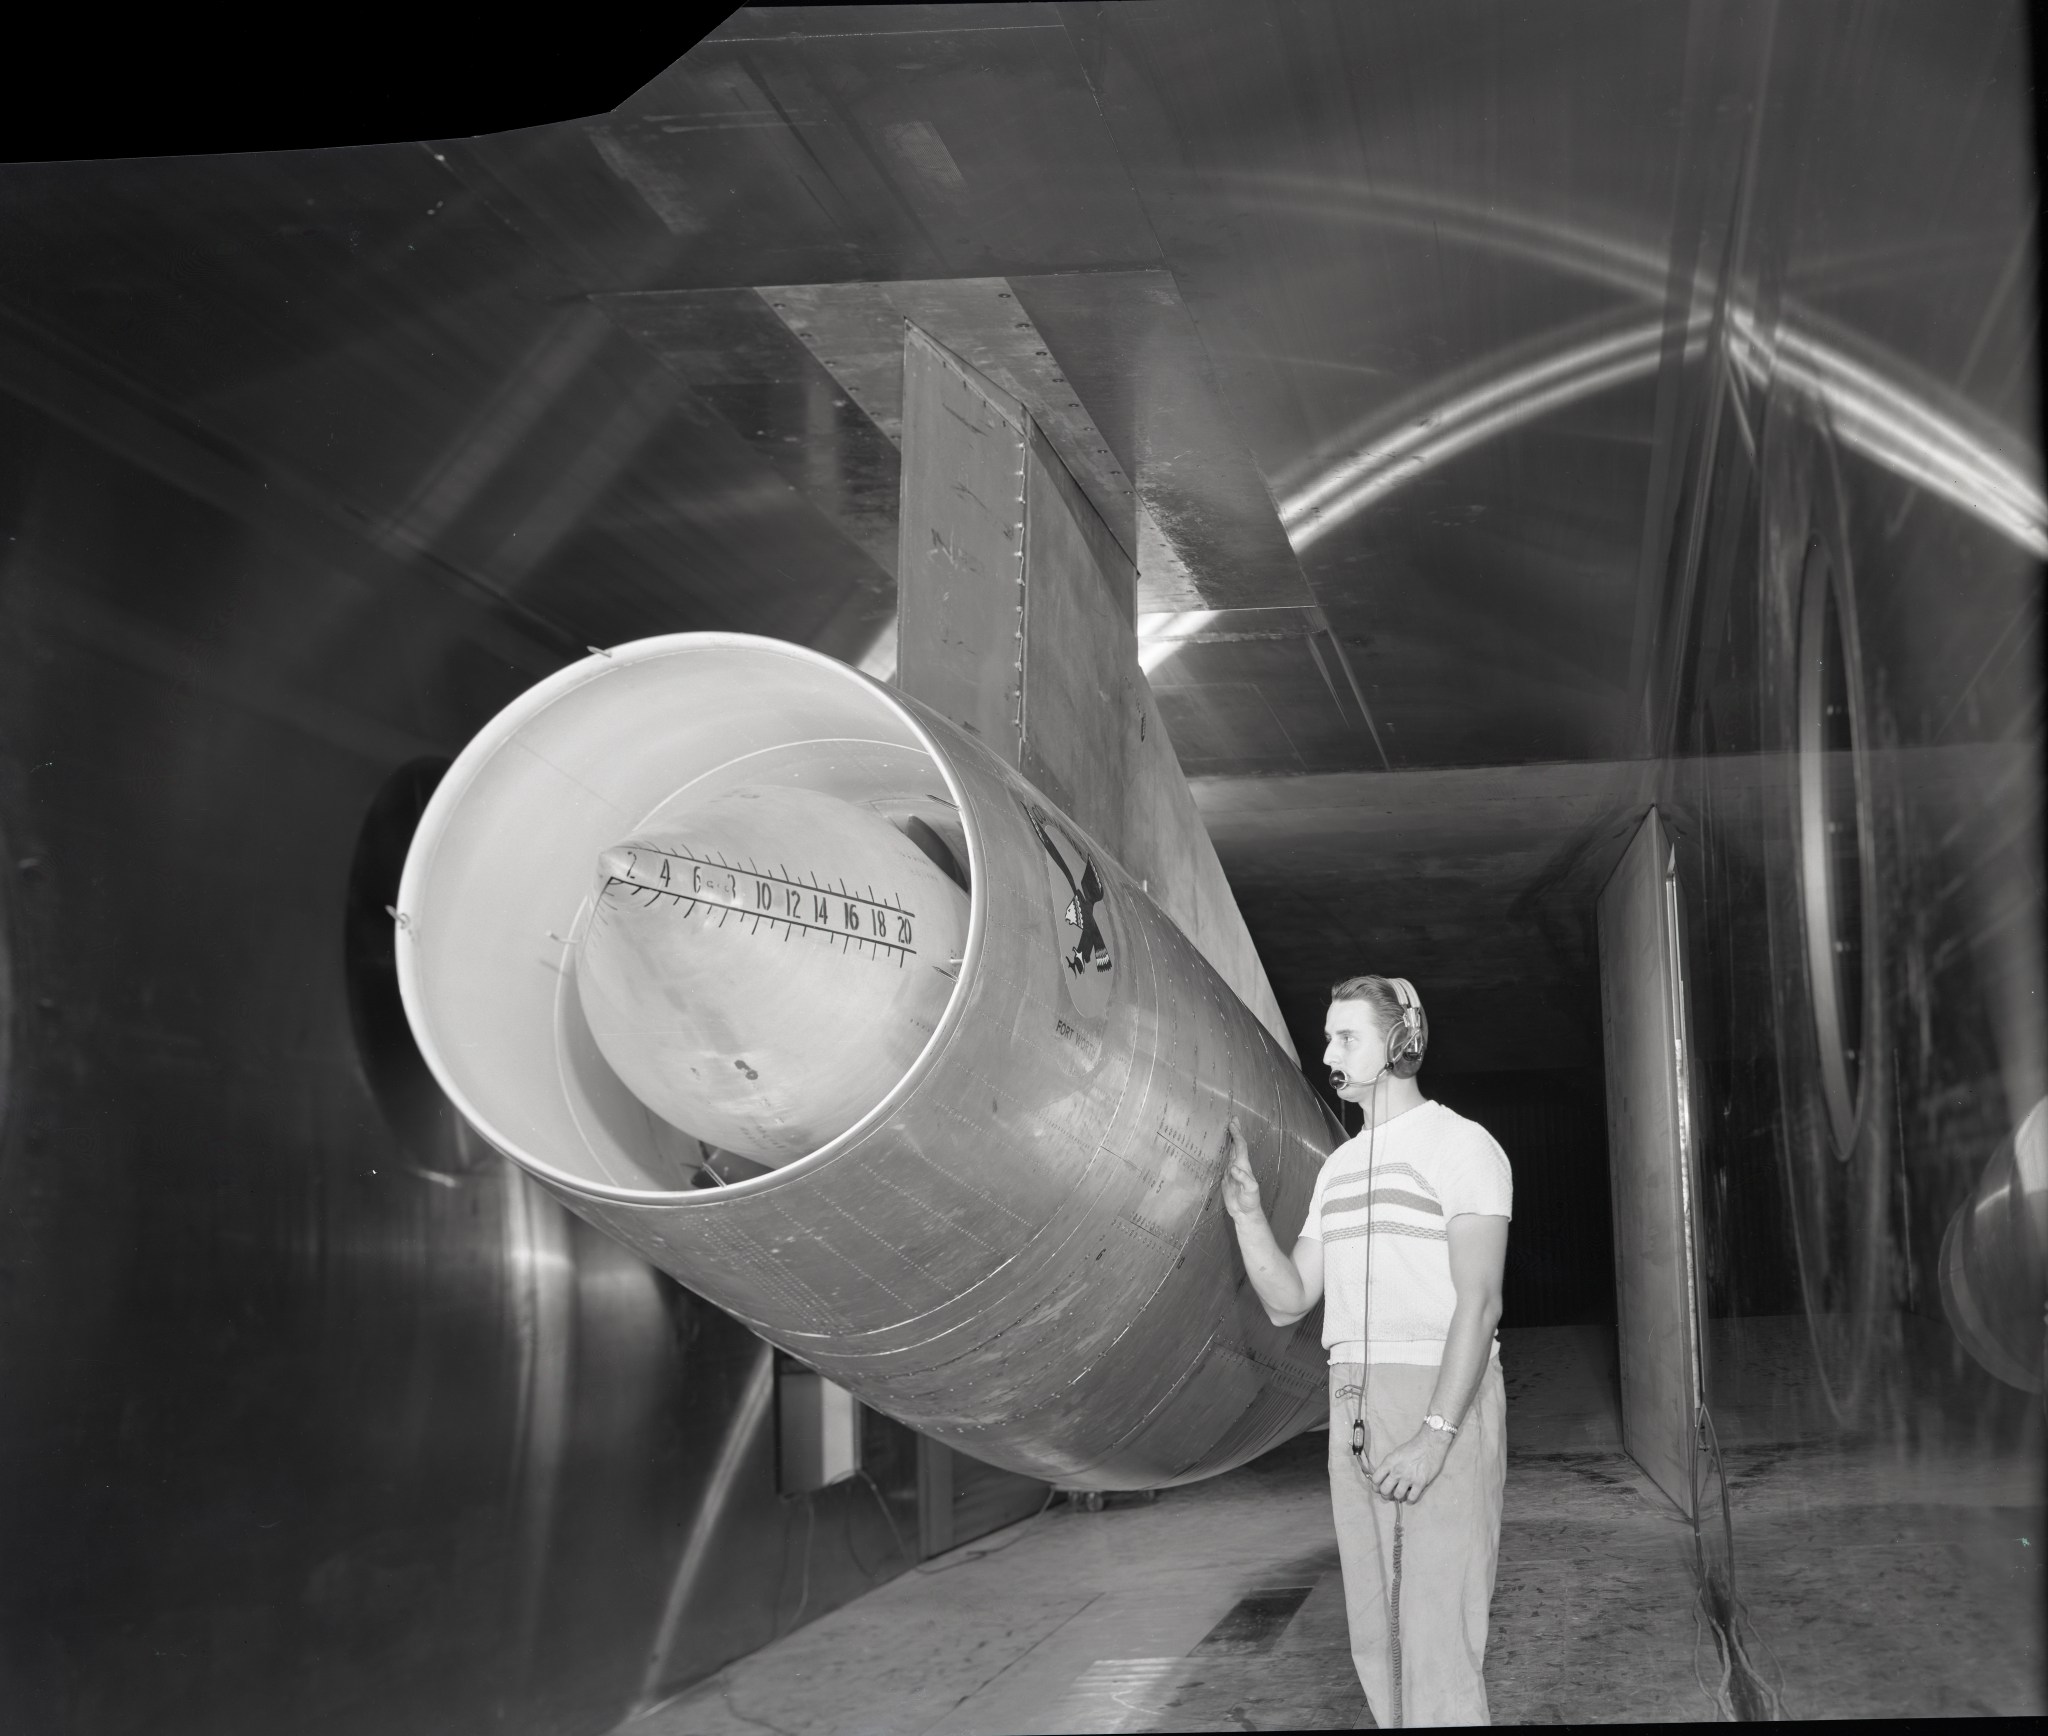 Man standing with large jet engine in wind tunnel test section.